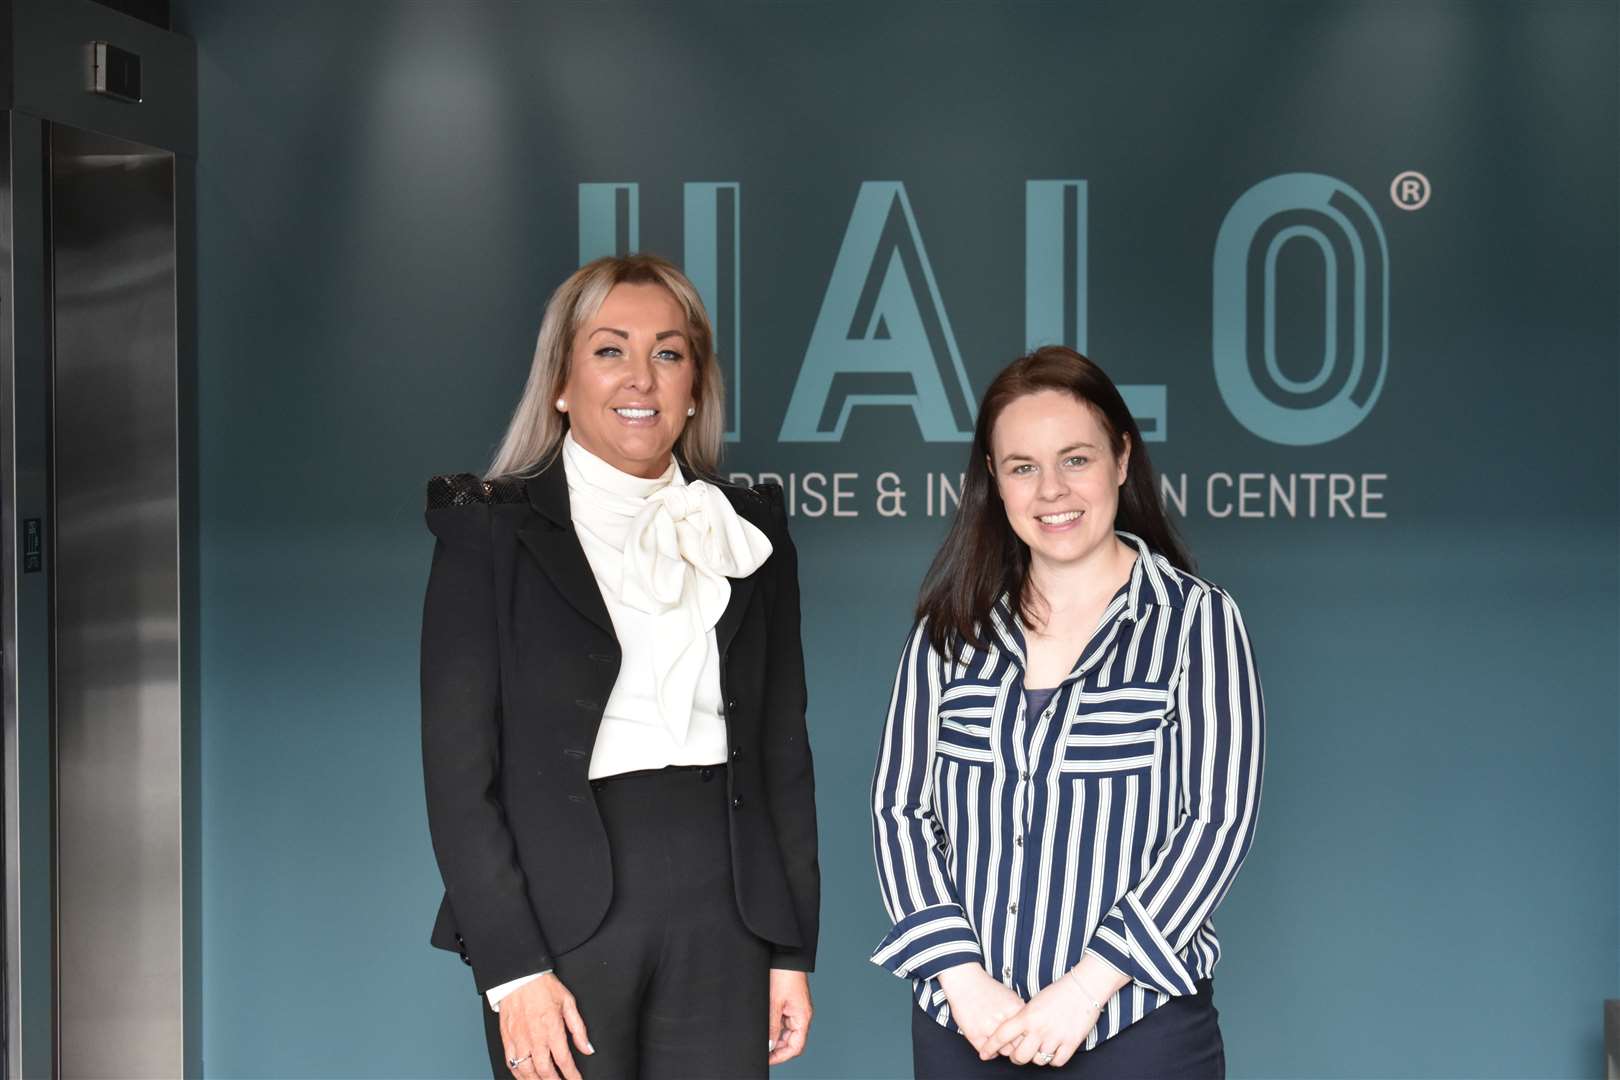 Kate Forbes (right) pictured today with Dr Marie Macklin CBE, of the Halo project